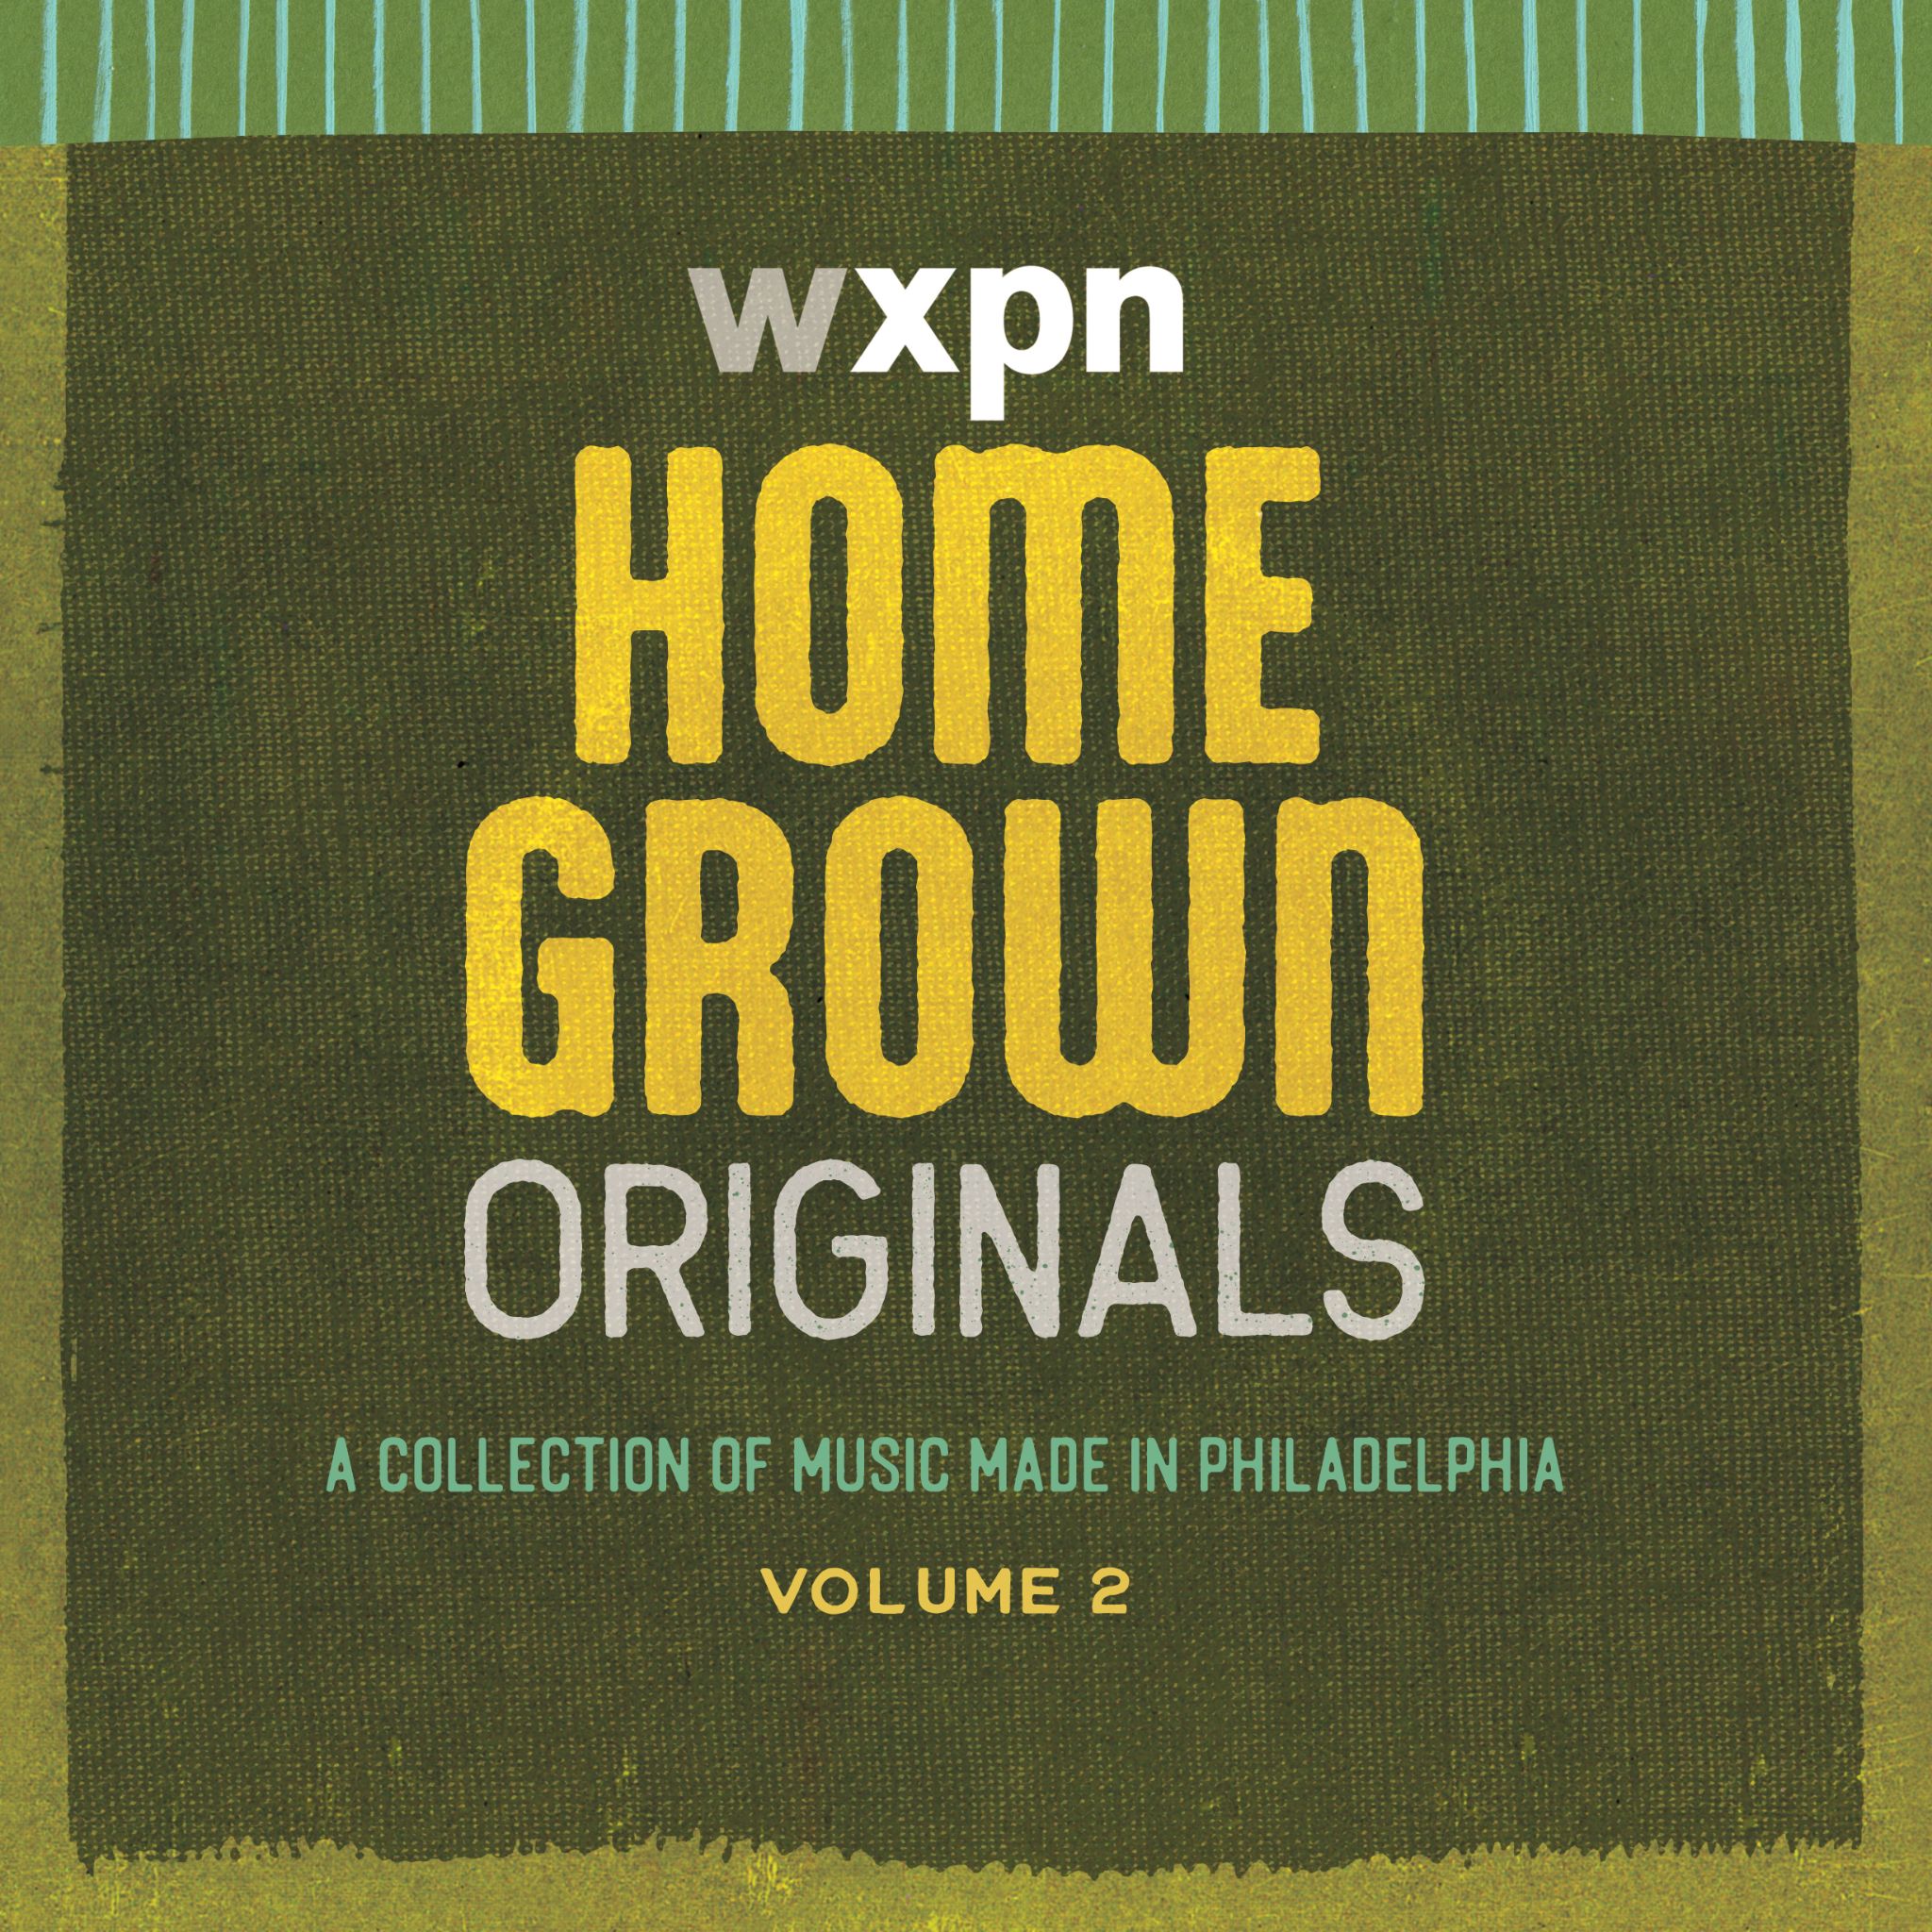 WXPN creates 'Homegrown Originals Vol. 2' limited-edition LP just for Record Store Day, April 20